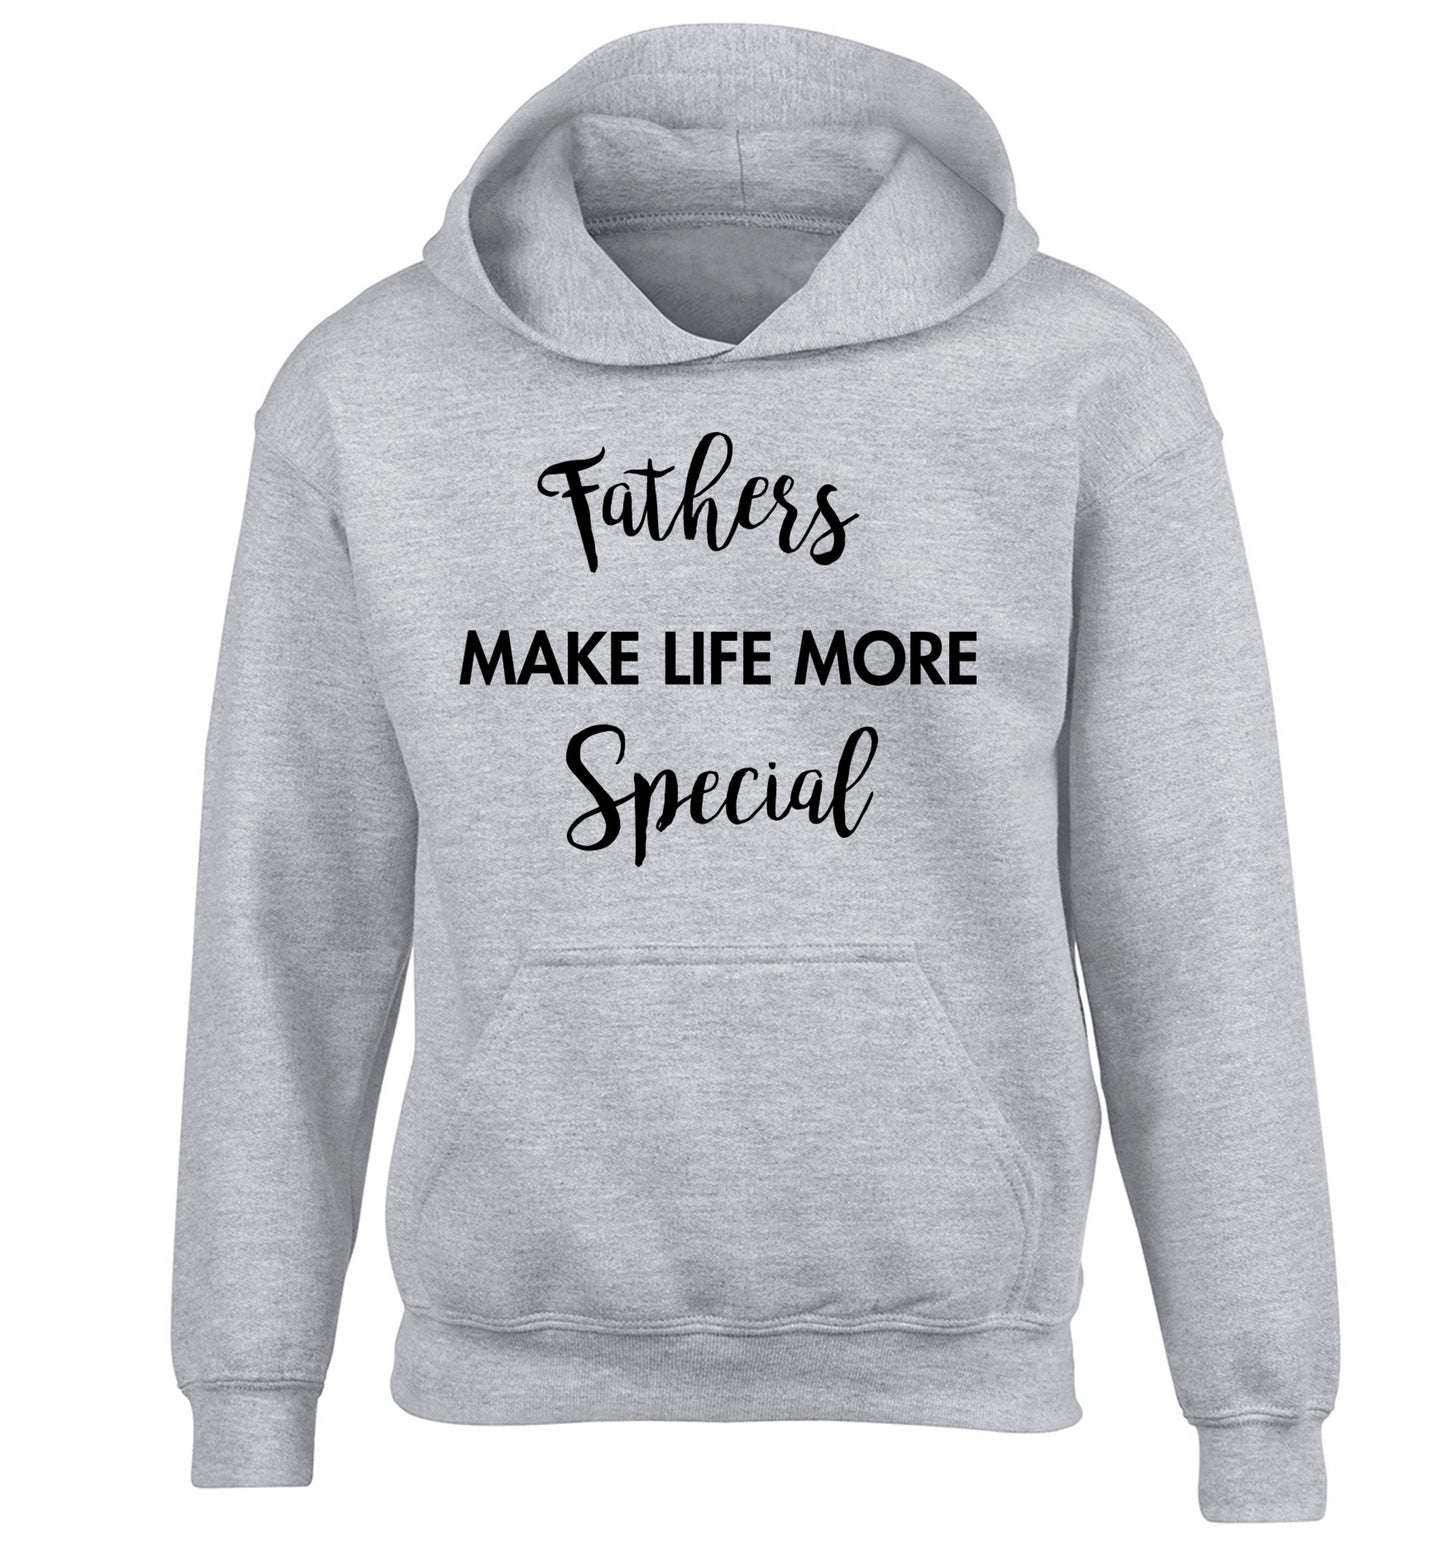 Fathers make life more special children's grey hoodie 12-14 Years